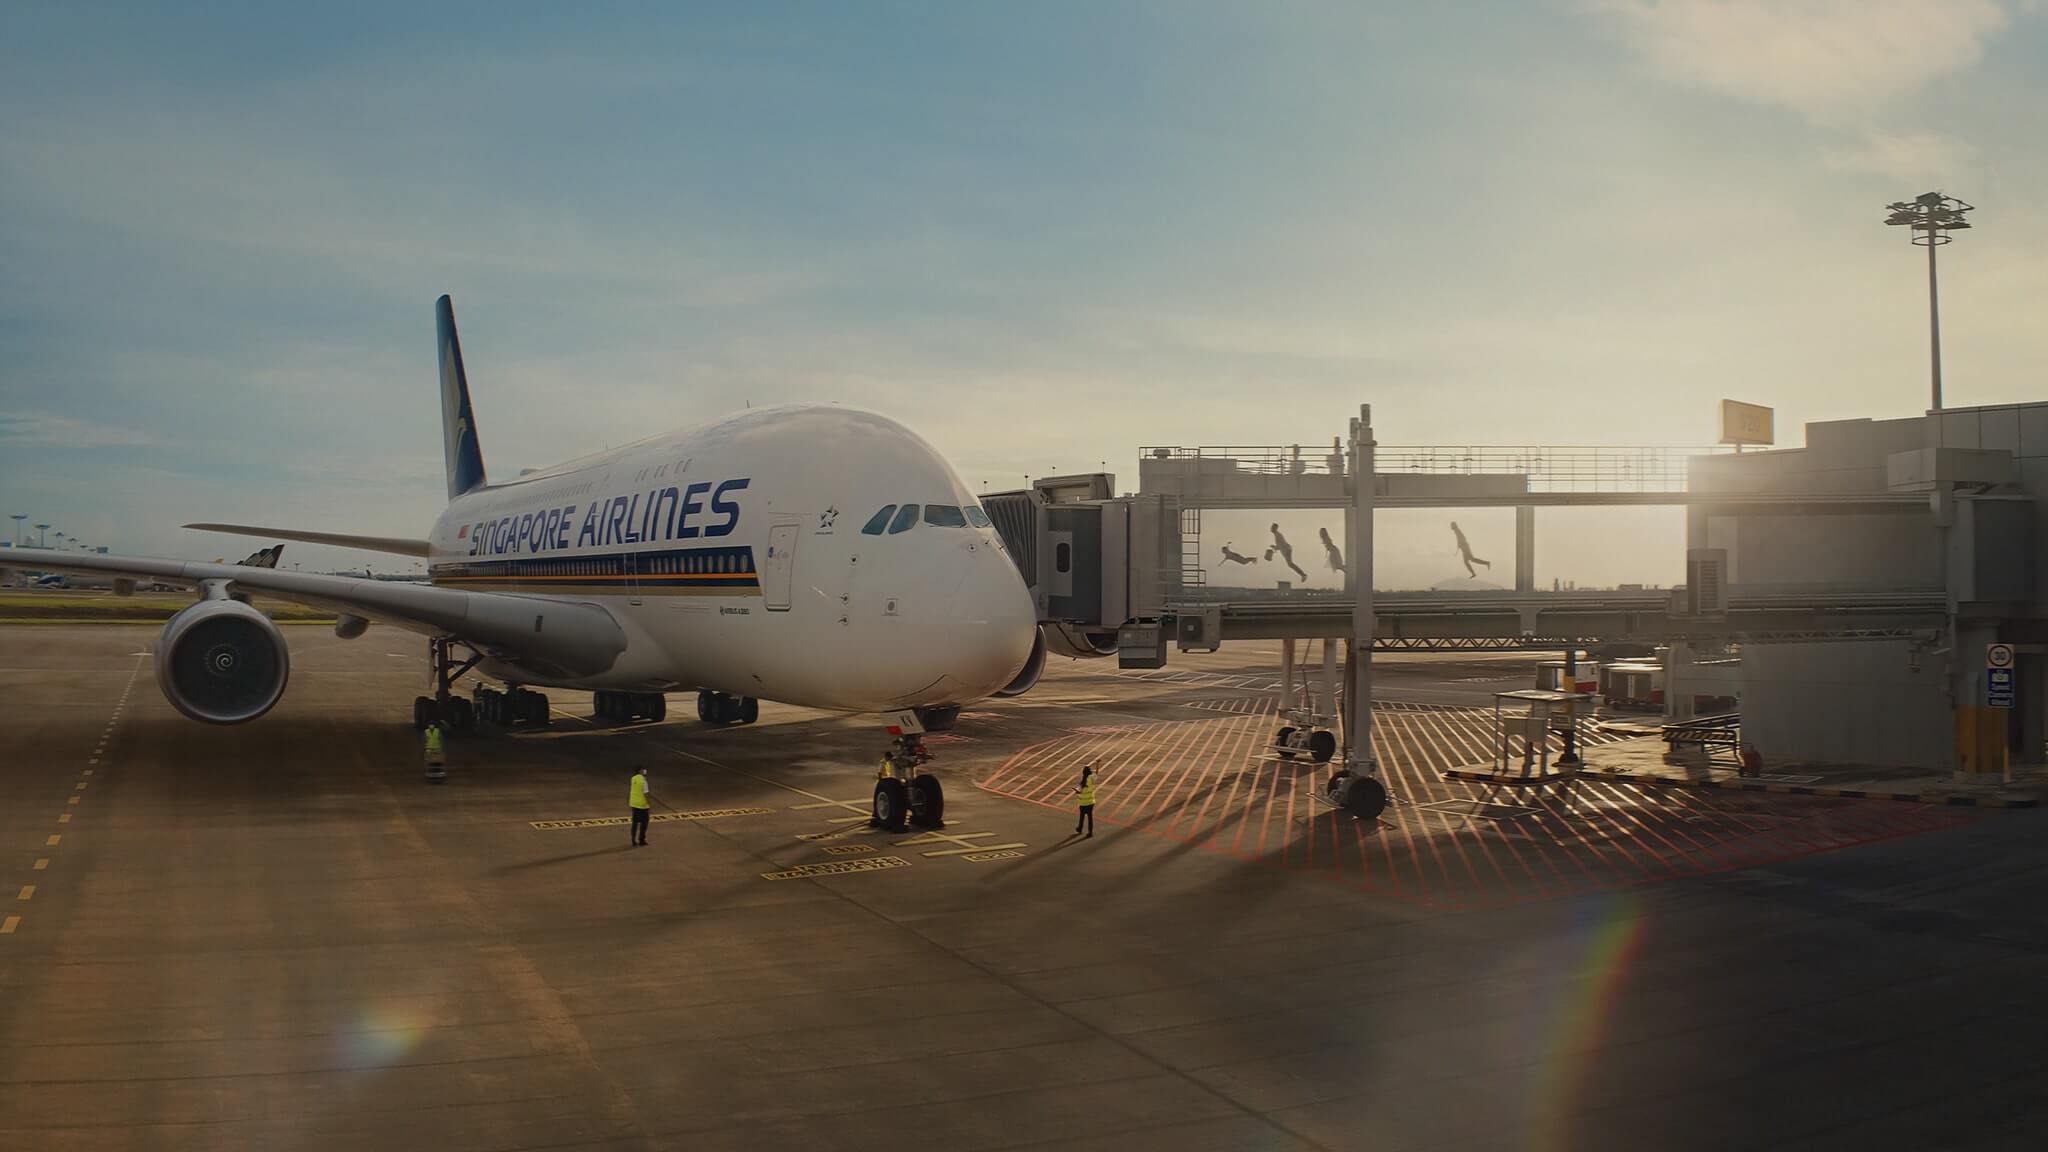 Make New Travel Memories with Singapore Airlines